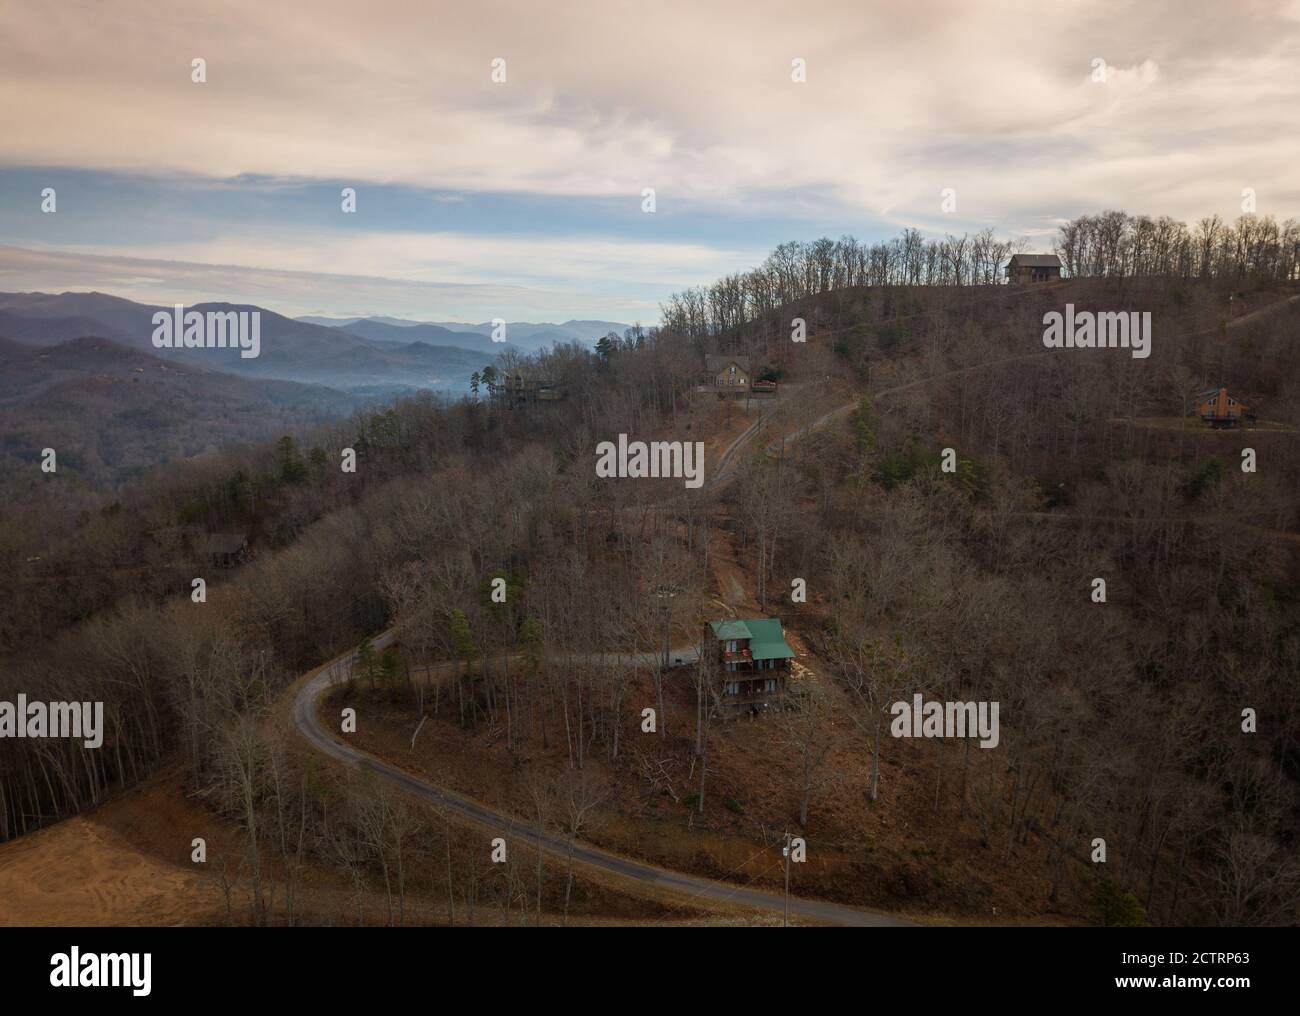 BRYSON CITY, NORTH CAROLINA - CIRCA DECEMBER 2019: Aerial view of typical mountain vacation cabins close to Bryson City, North Carolina Stock Photo